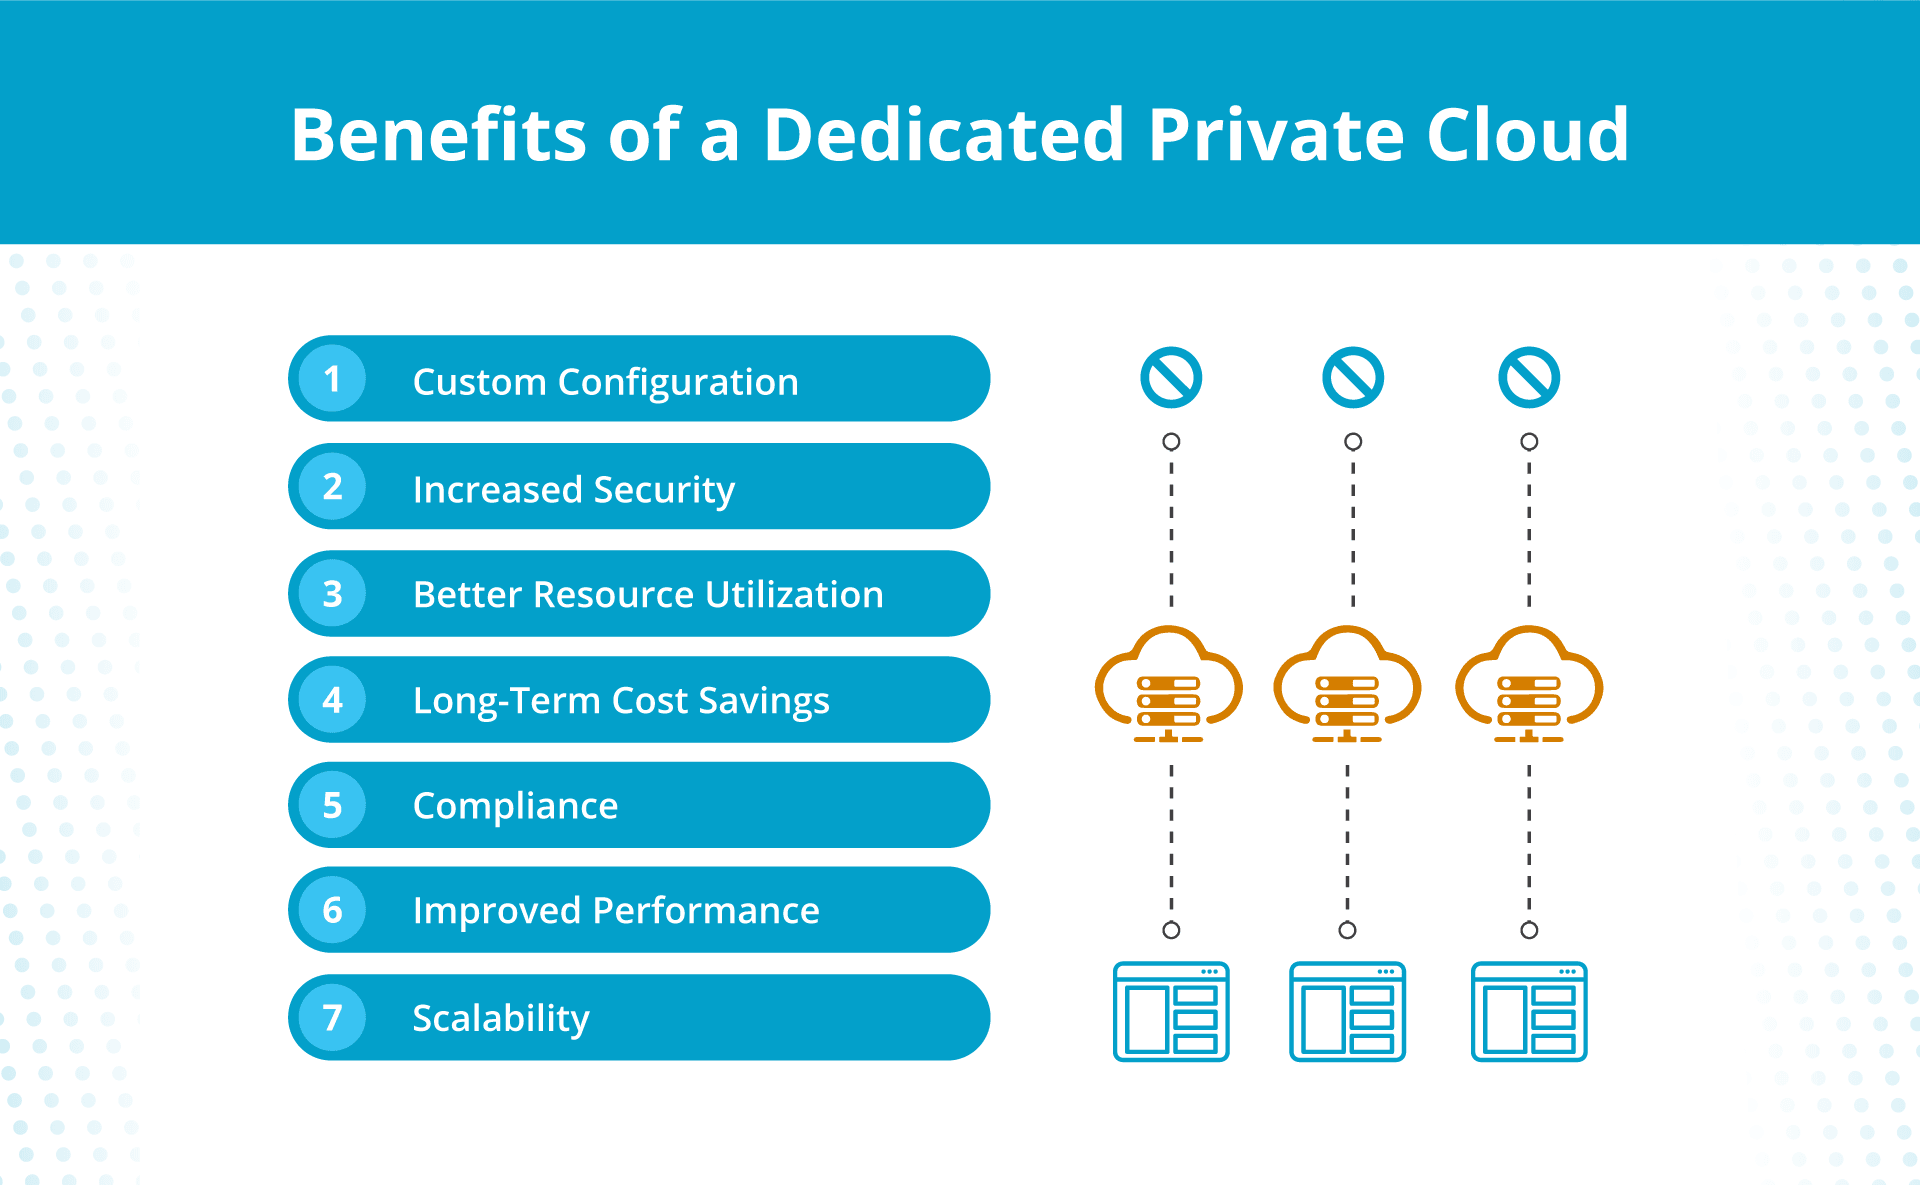 Dedicated private cloud benefits include better resource utilization and long-term cost savings.